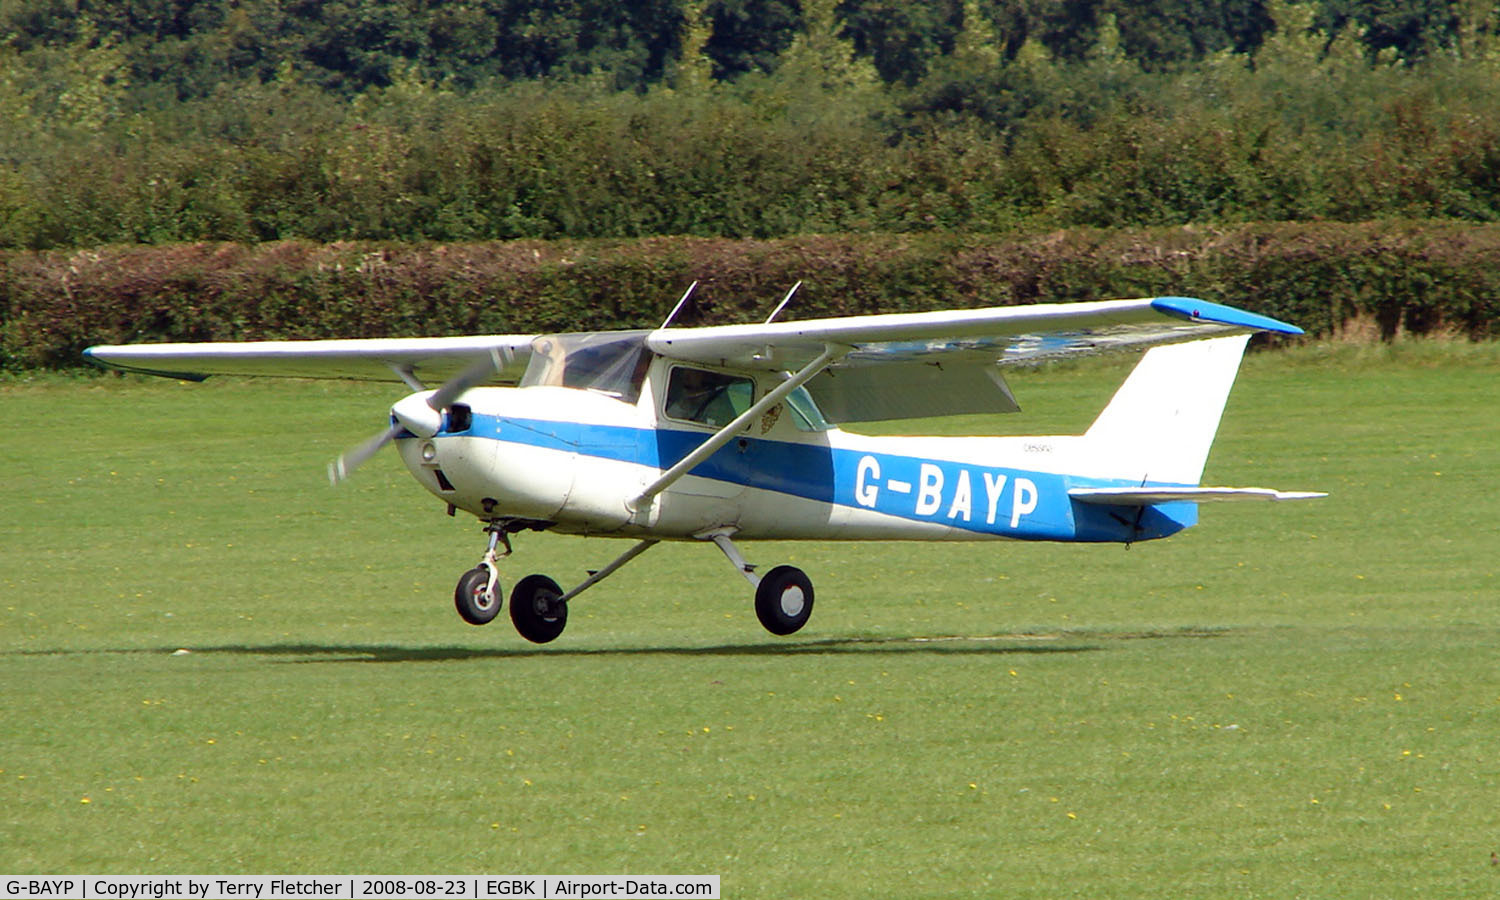 G-BAYP, 1973 Cessna 150L C/N 150-74017, Visitor to Sywell on 2008 Ragwing Fly-in day